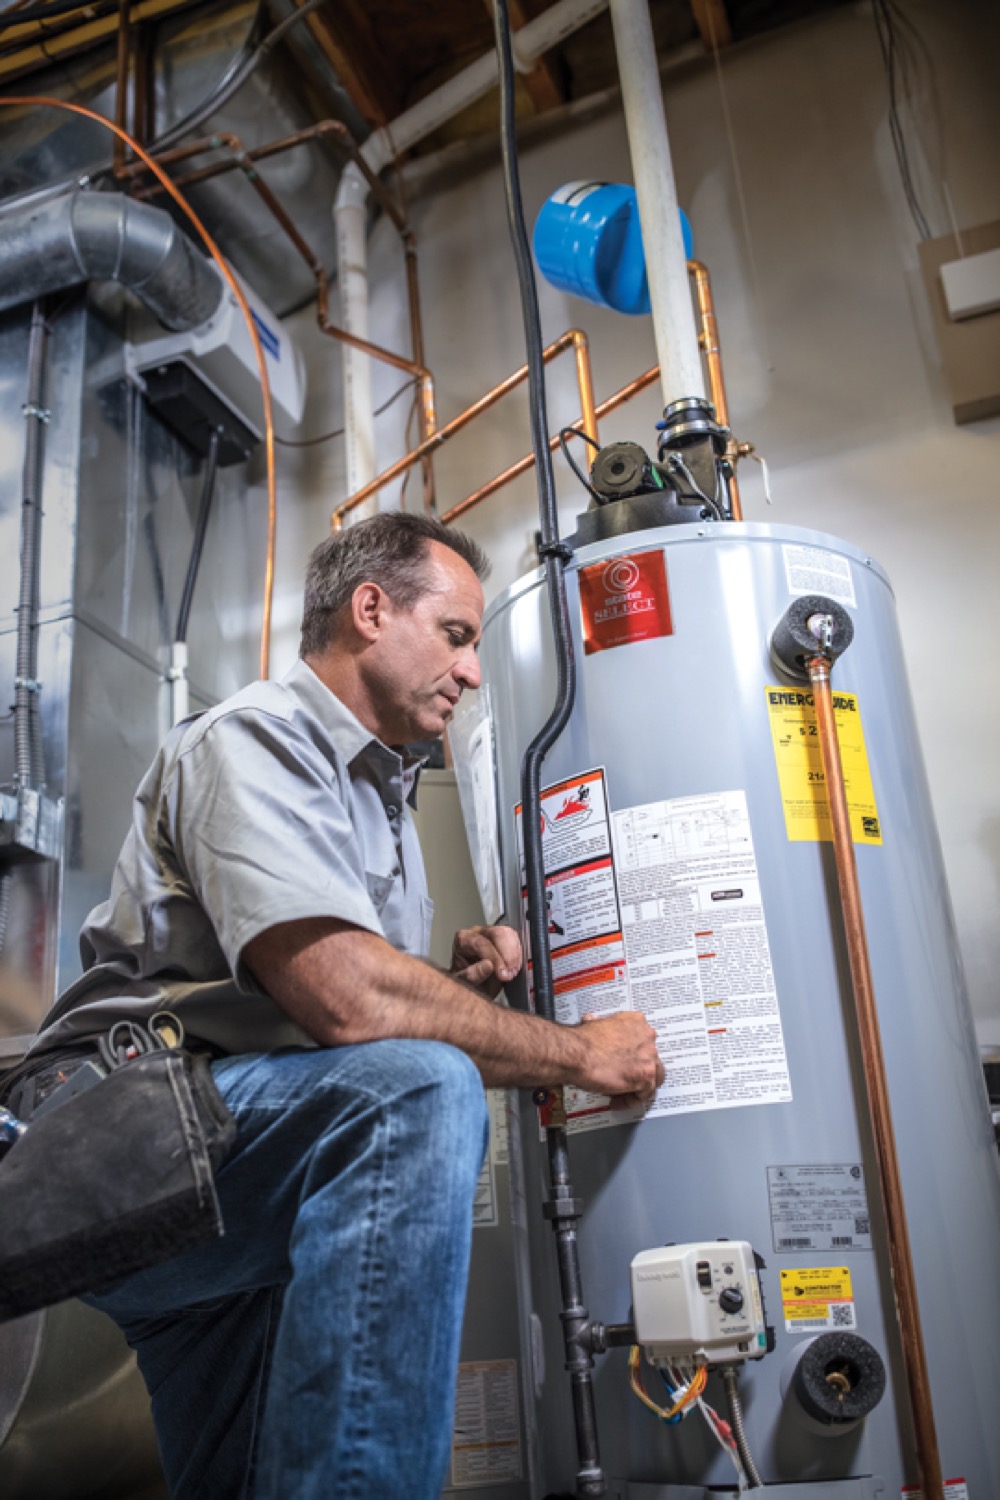 Superior Propane employee servicing a water heater.